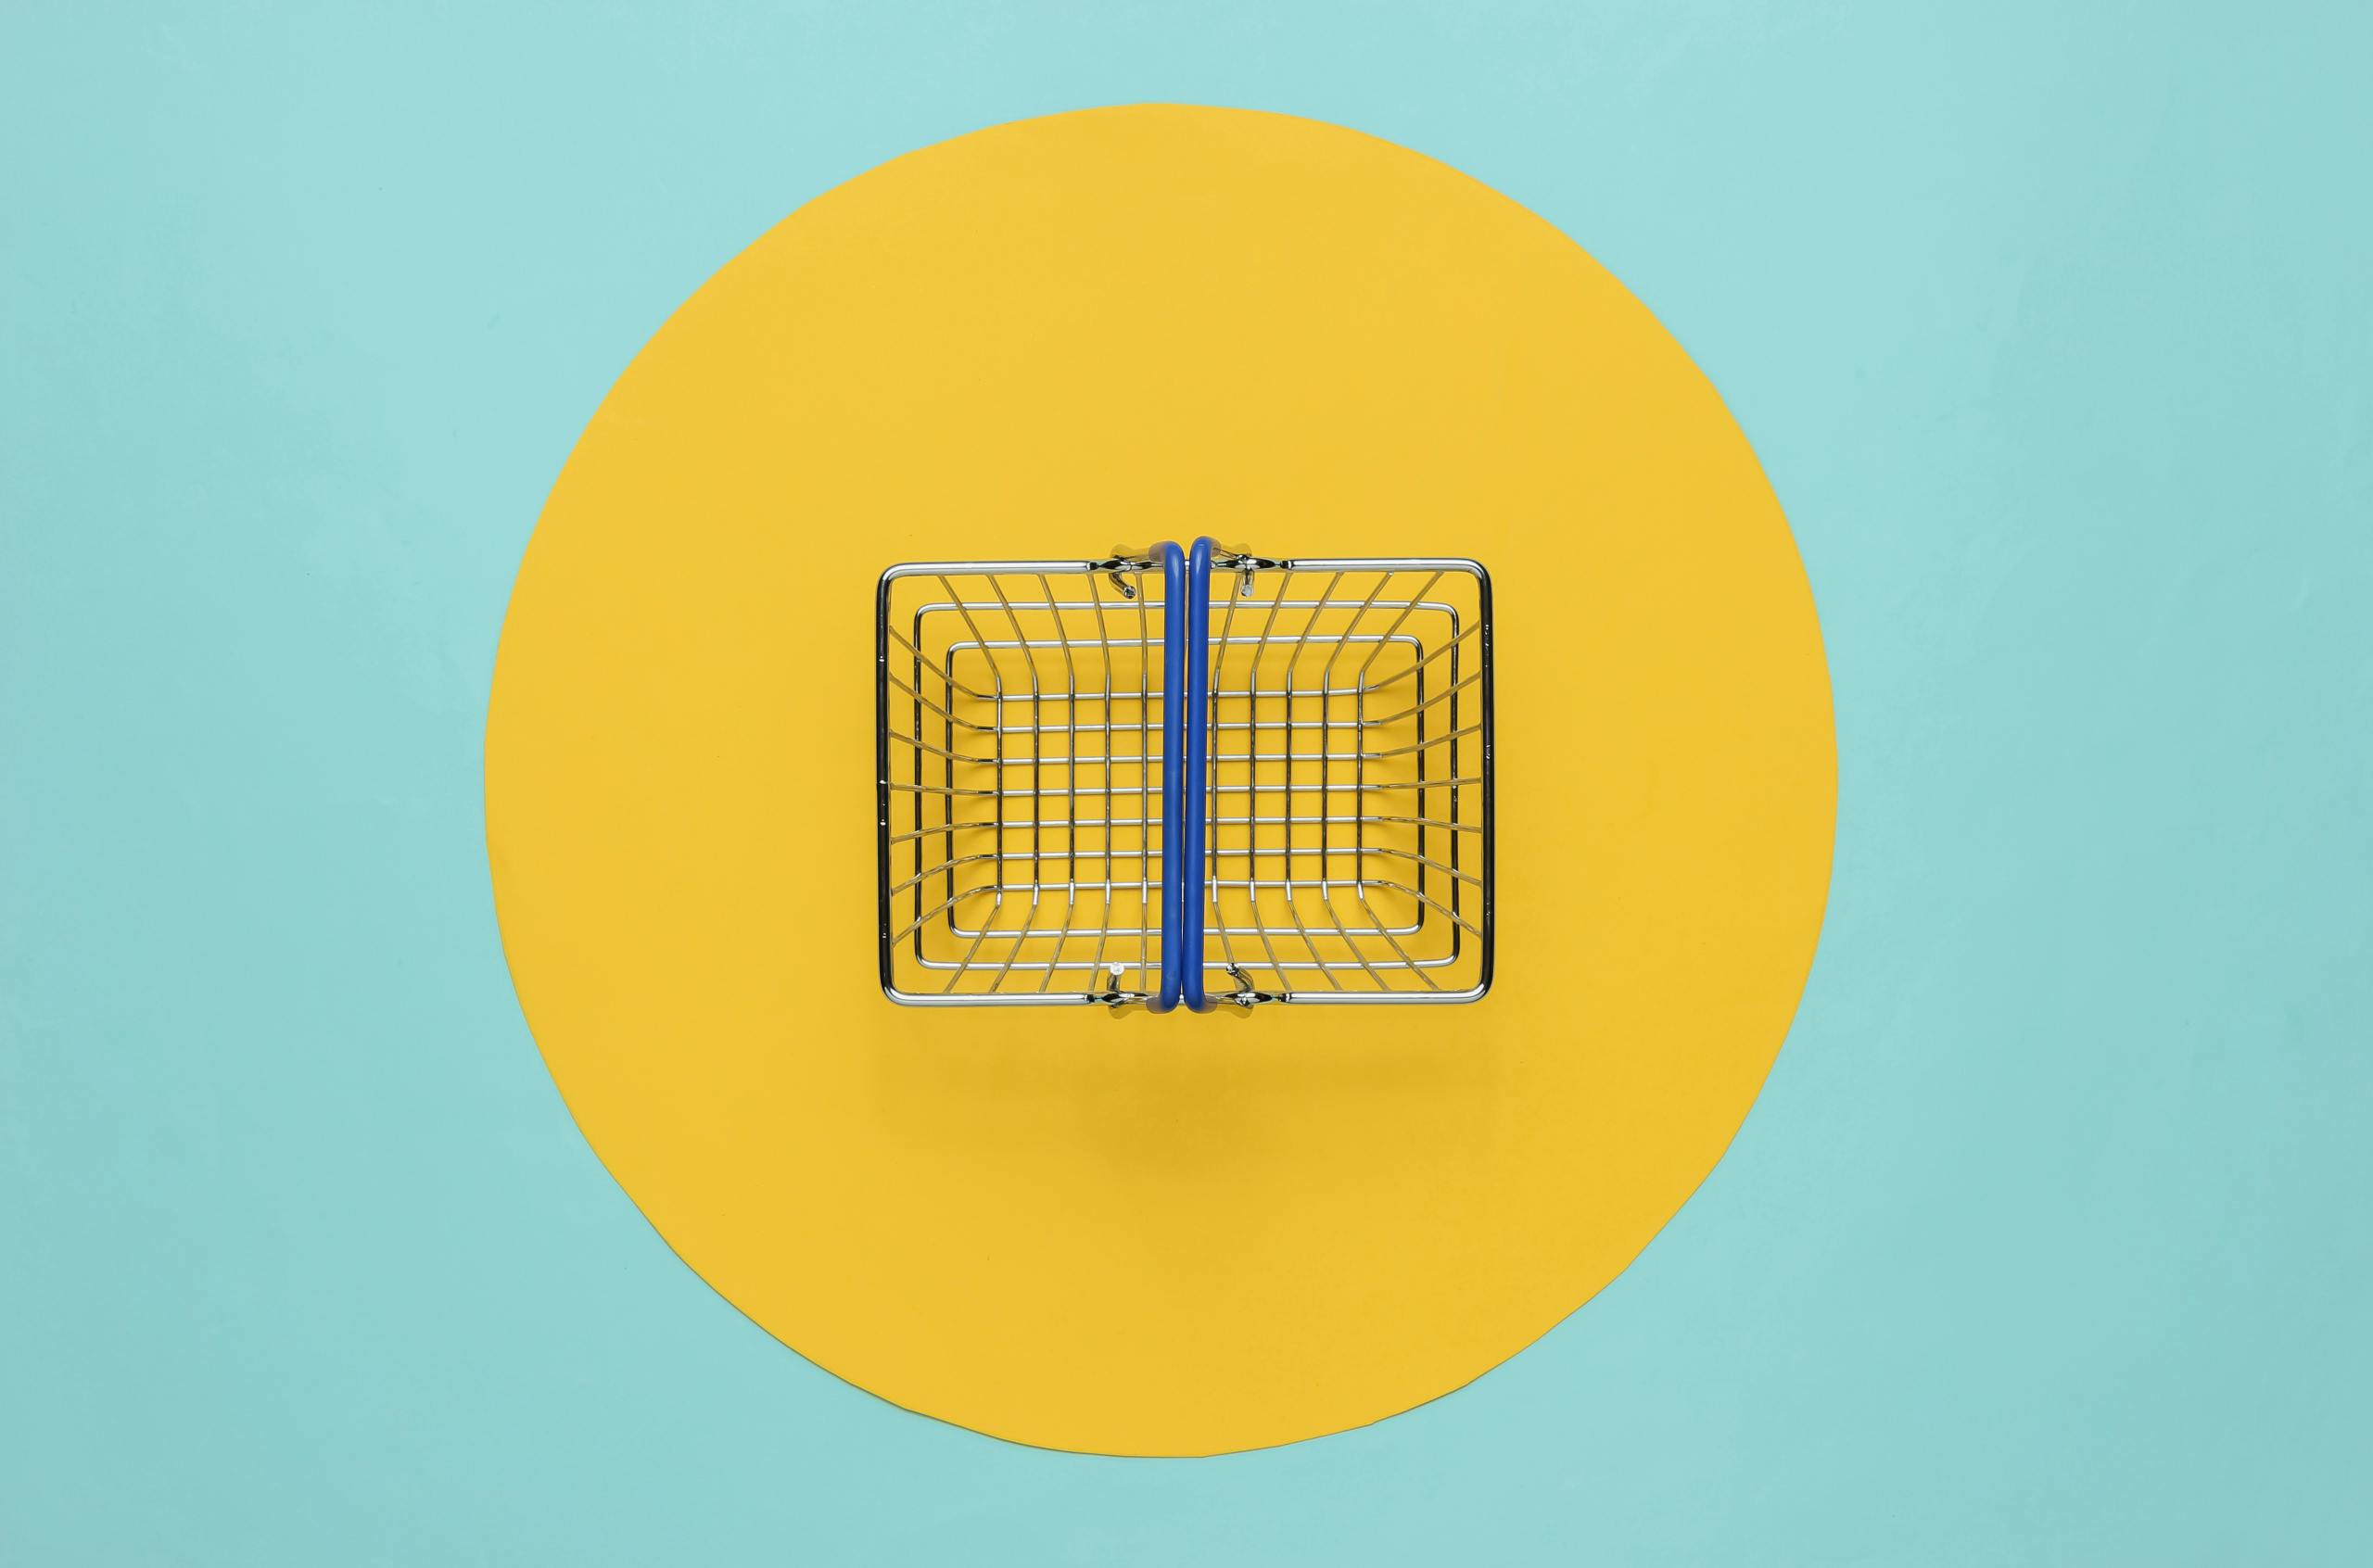 Mini shopping basket on blue background with yellow circle